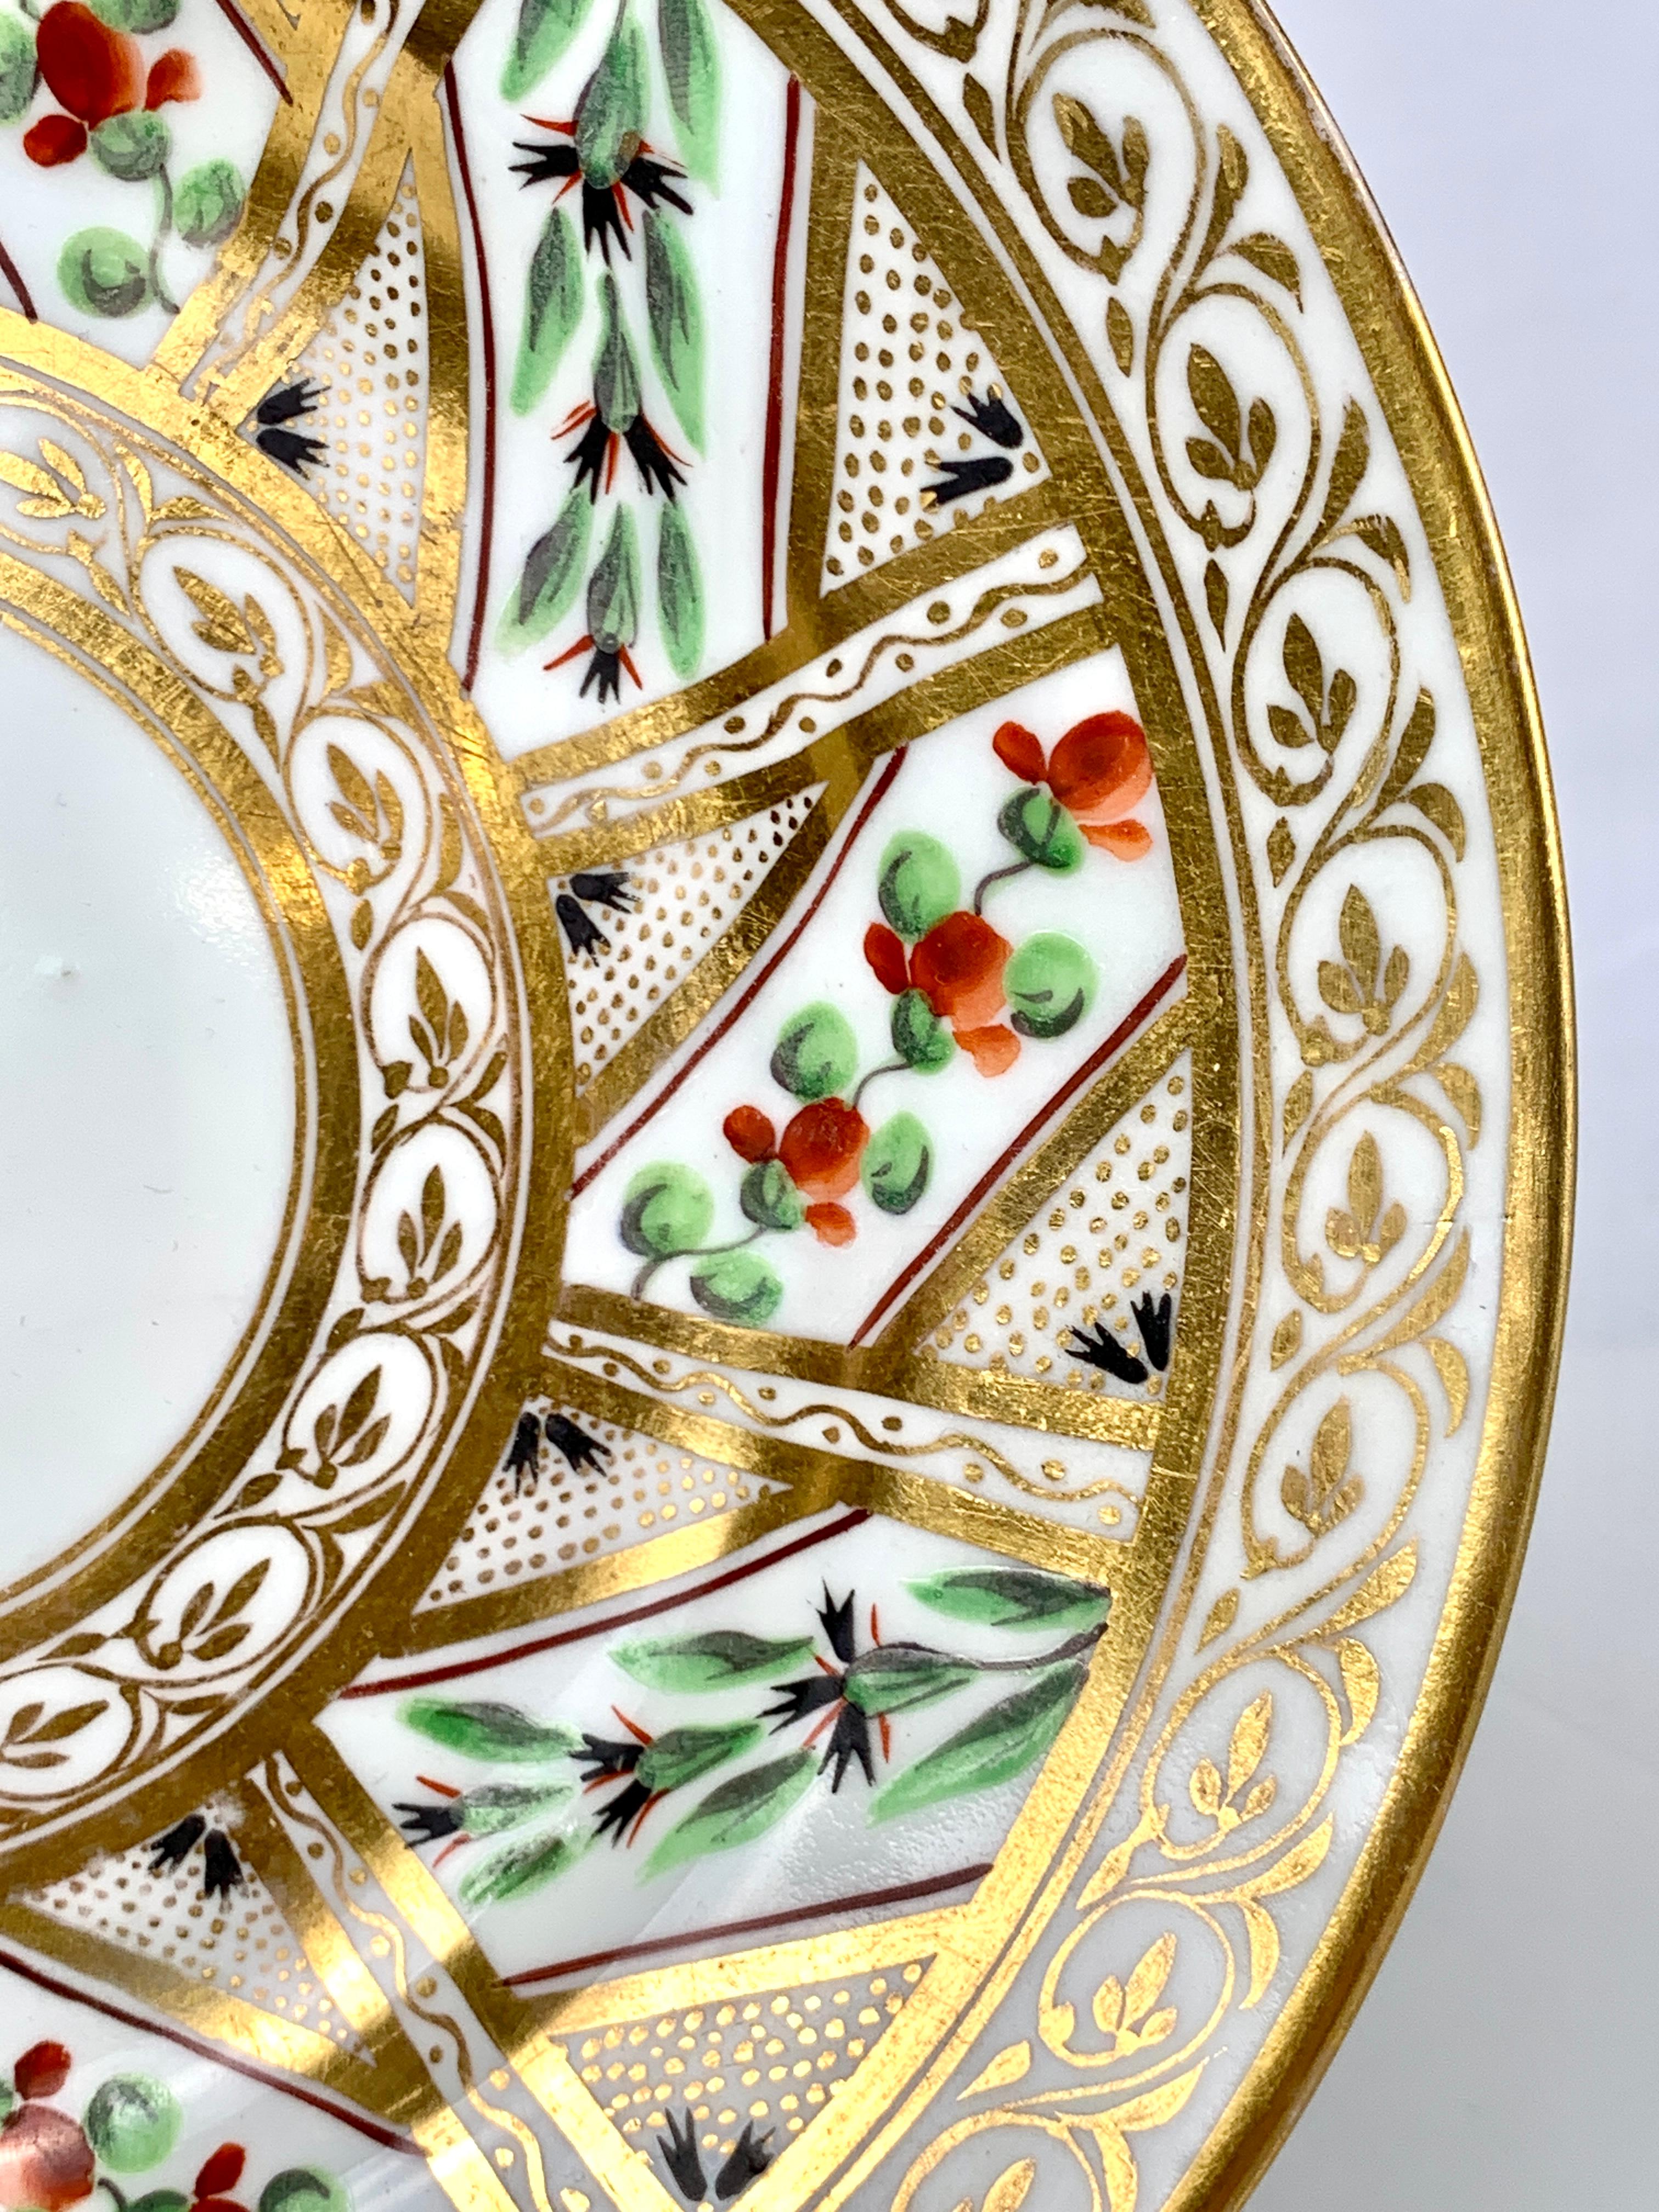 Hand-Painted Set of Six Colorful Derby Porcelain Dishes Made in England, Circa 1810